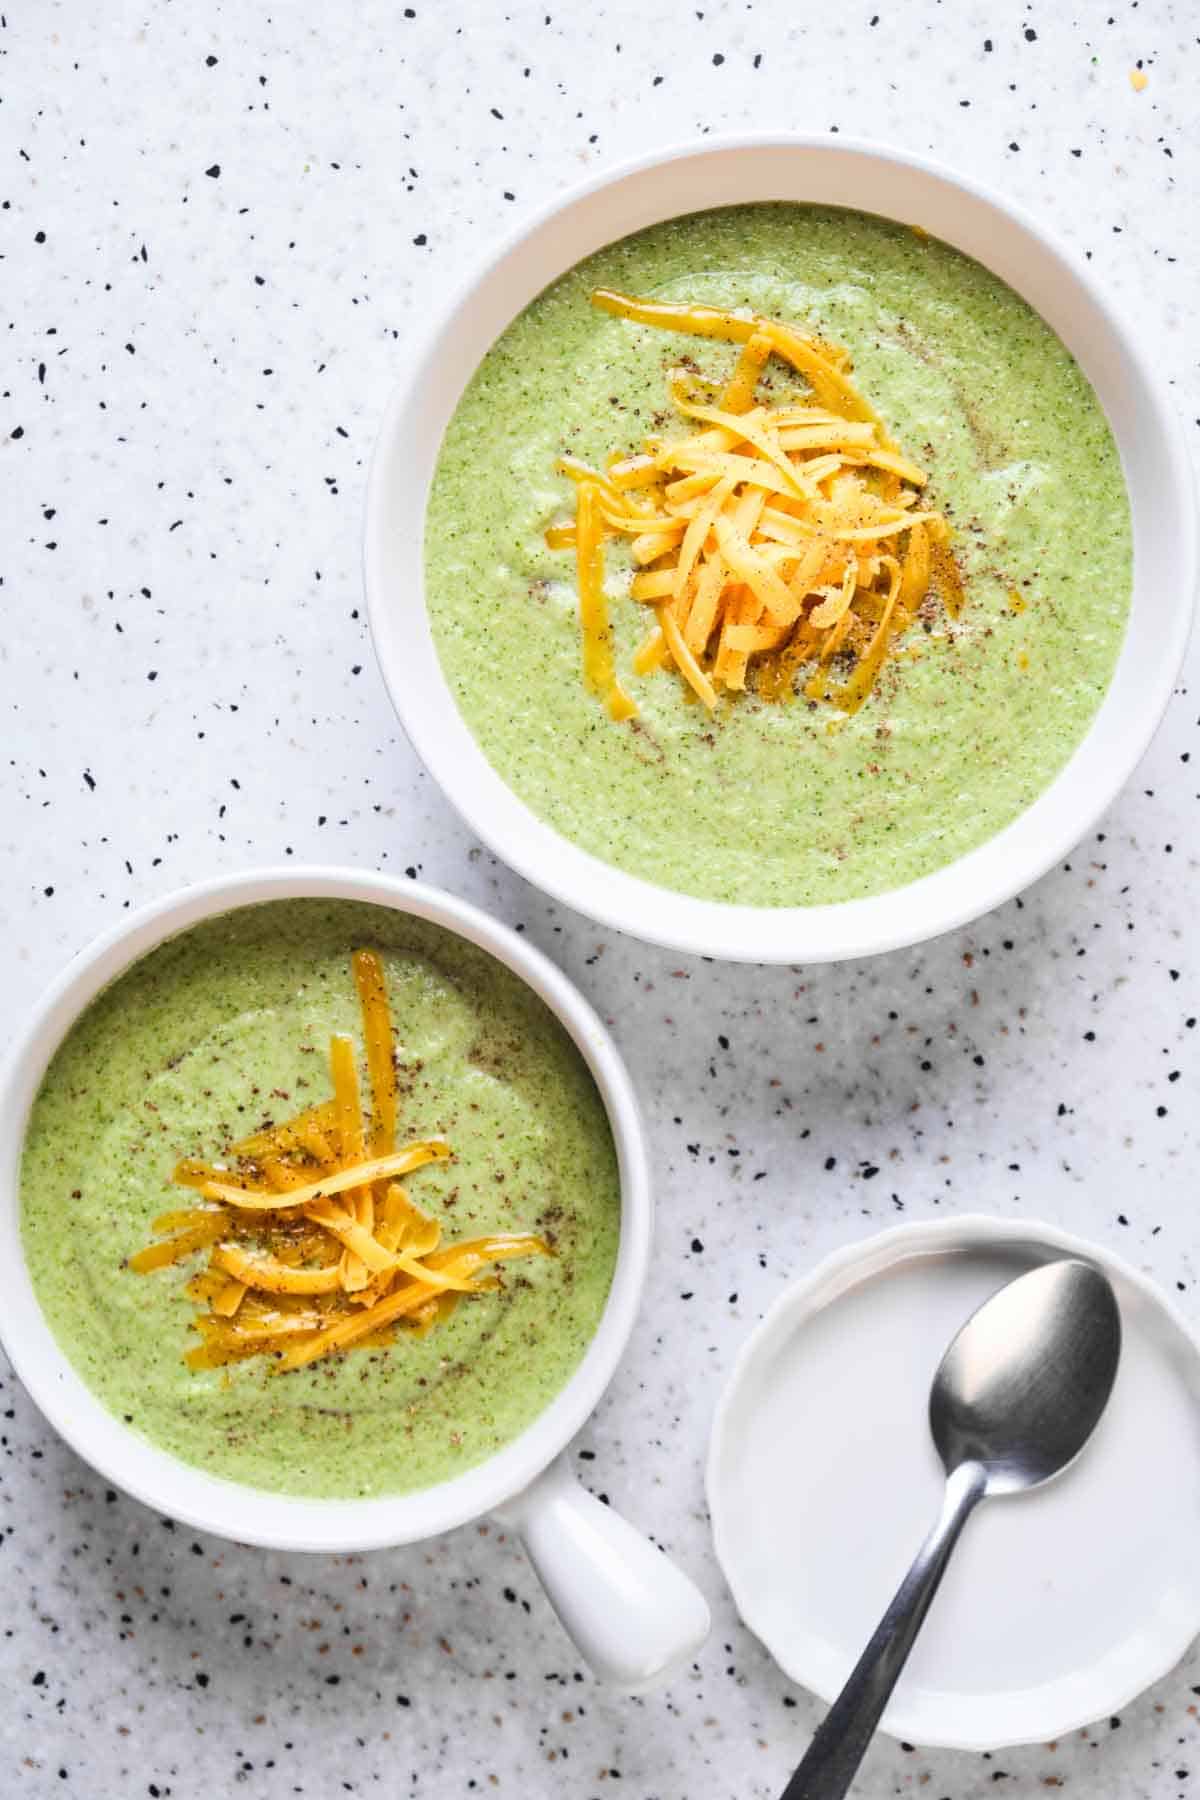 Top view of two bowls of broccoli soup with grated orange cheddar on top.